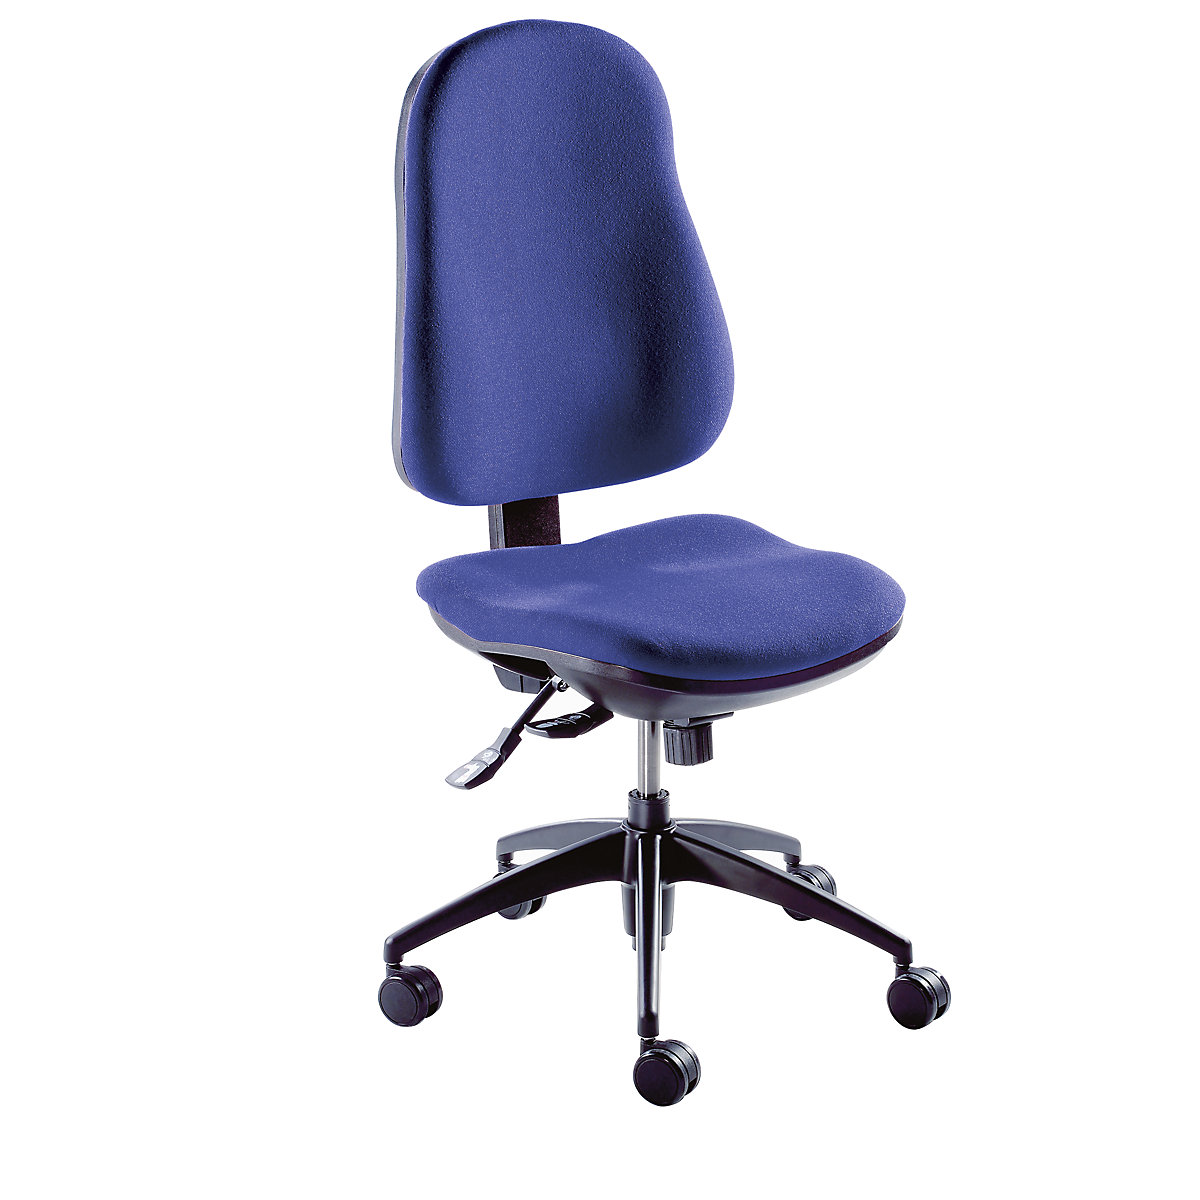 Ergonomic swivel chair – eurokraft pro, point synchronous mechanism, without arm rests, blue covering-3